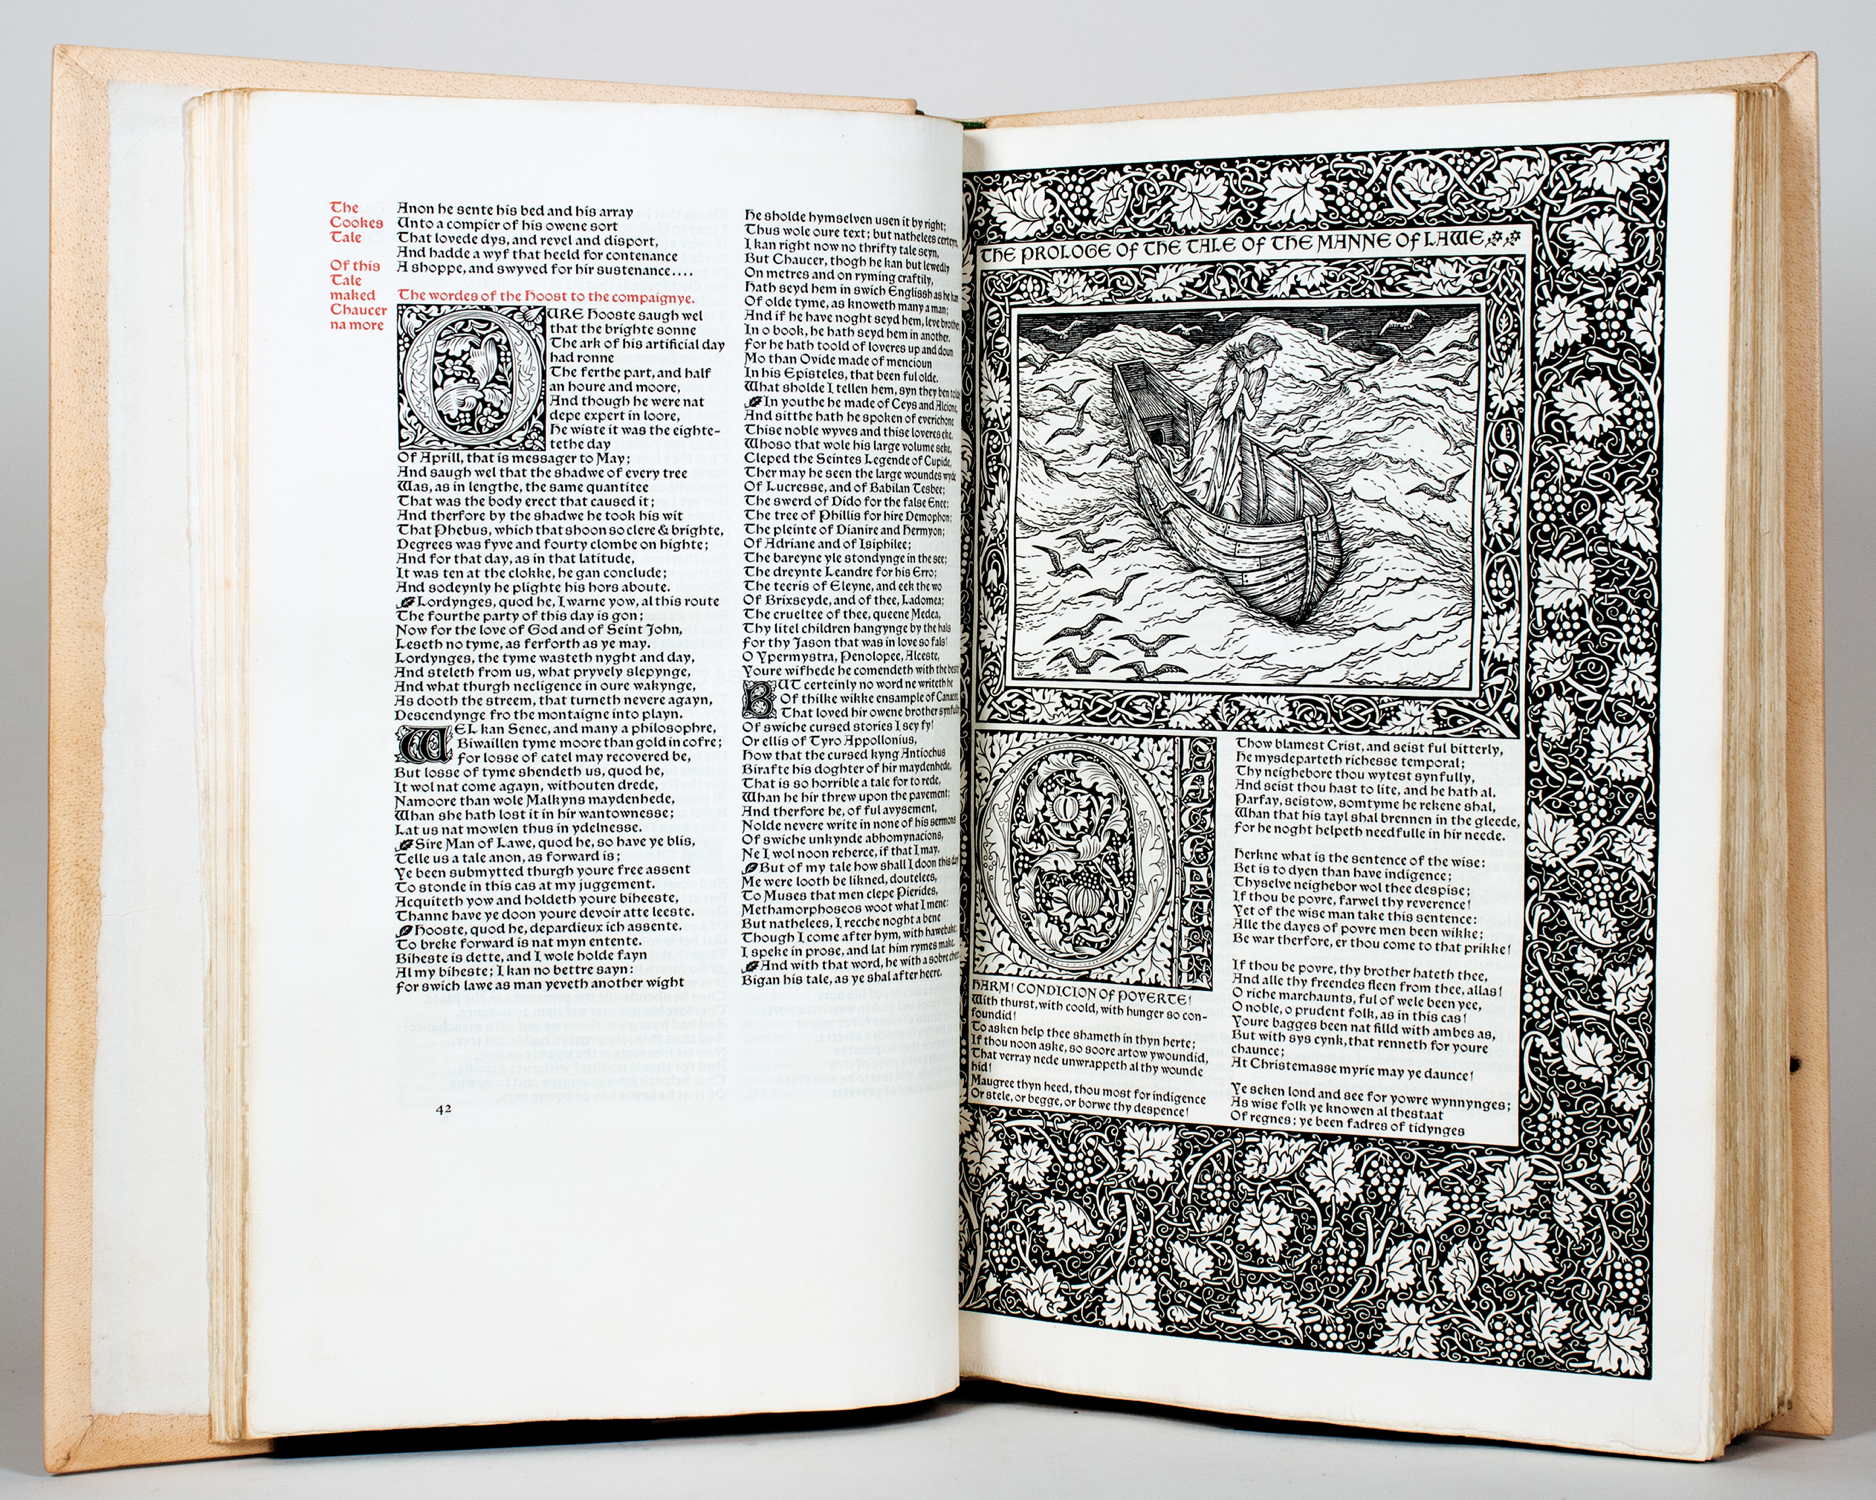 Kelmscott - Chaucer. The Works. 1896 - Image 6 of 7